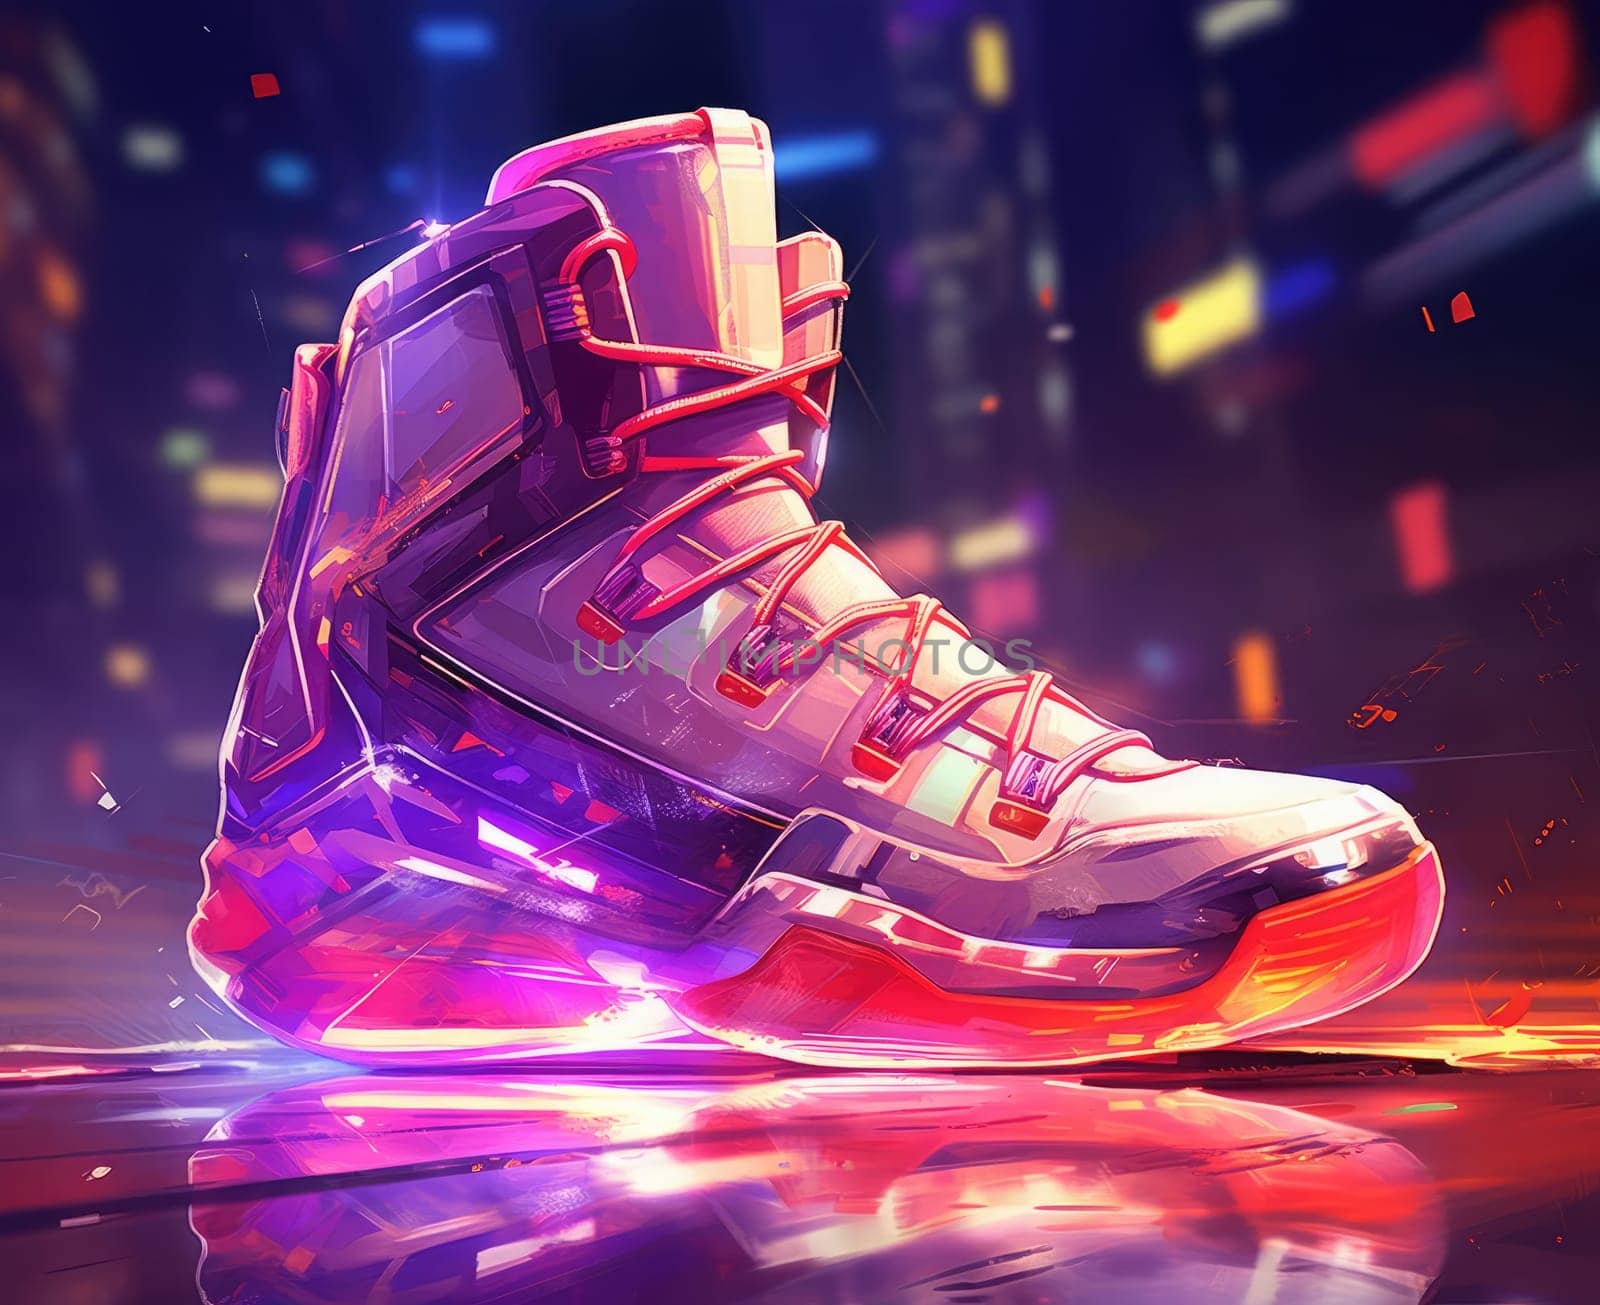 Sneakers with glowing cyberpunk elements by cherezoff